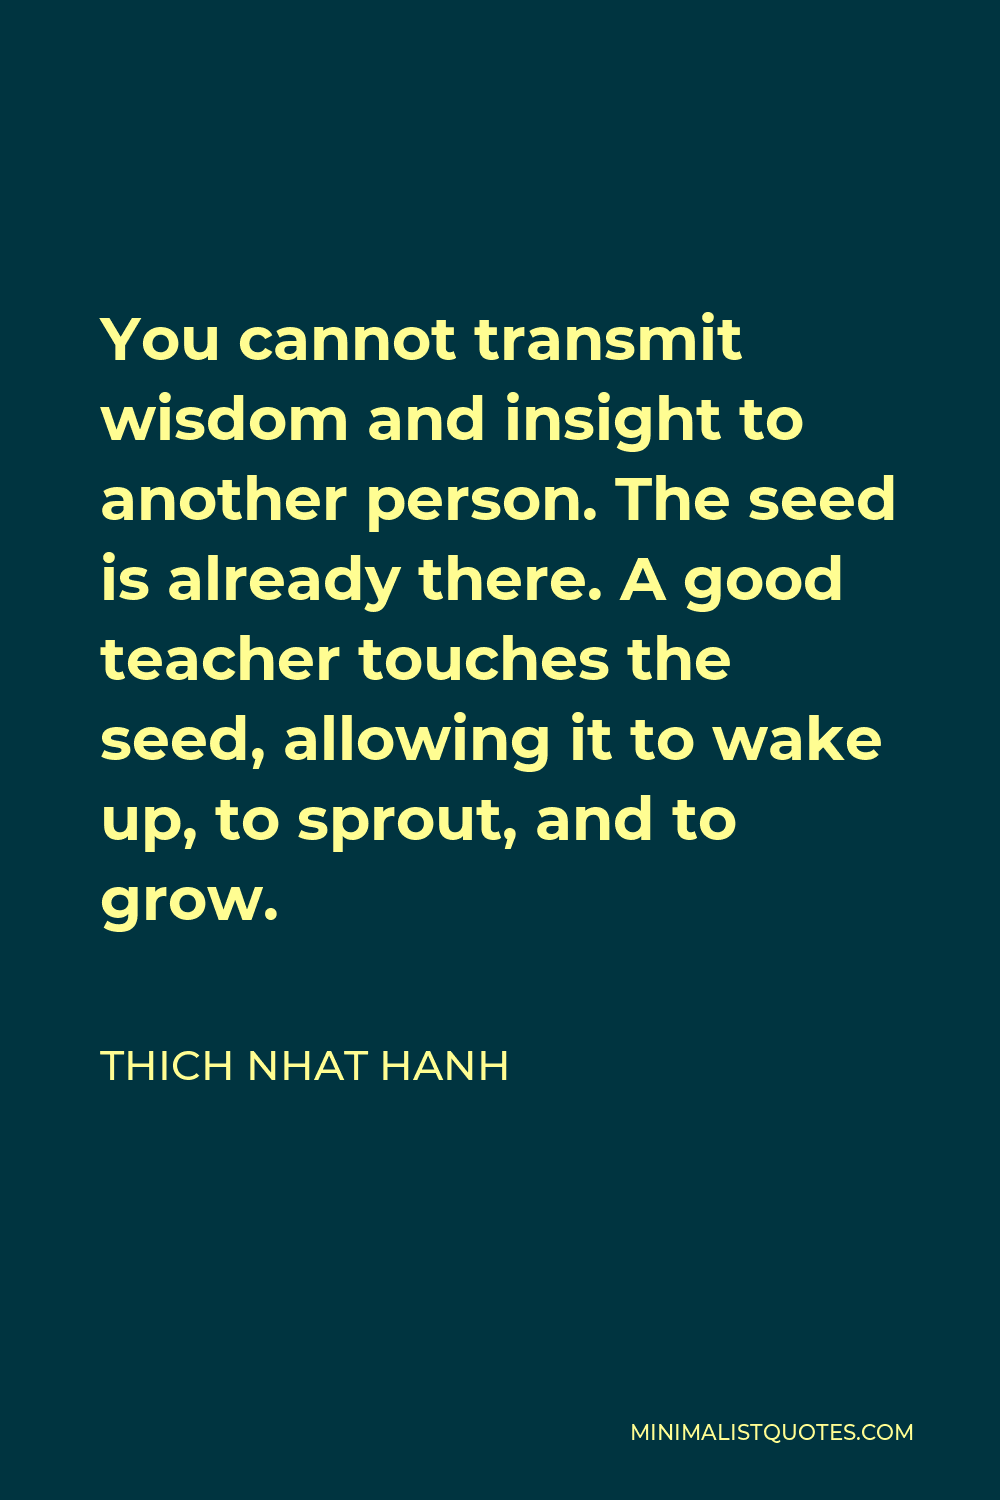 Thich Nhat Hanh Quote - You cannot transmit wisdom and insight to another person. The seed is already there. A good teacher touches the seed, allowing it to wake up, to sprout, and to grow.